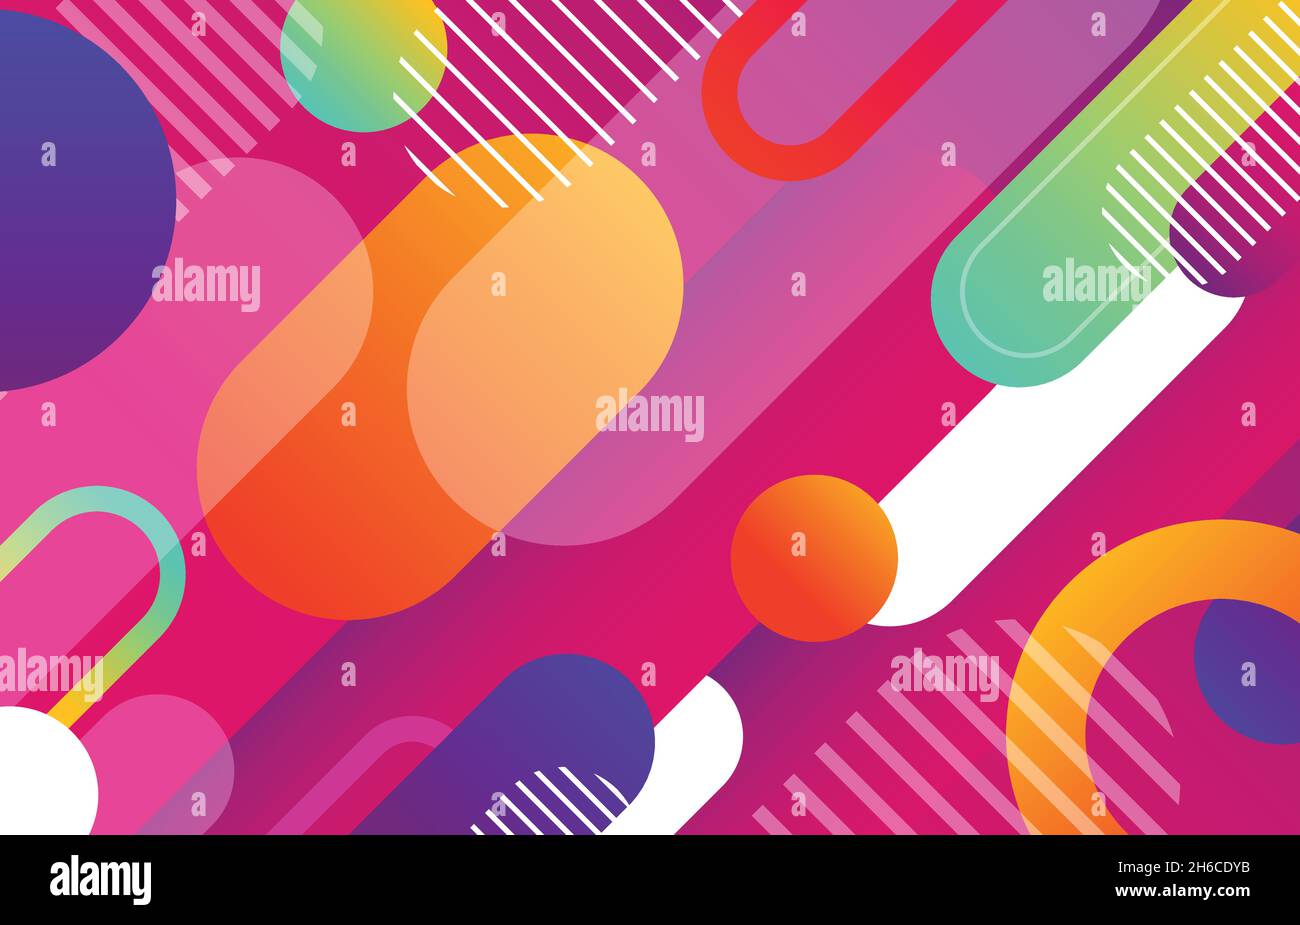 Abstract geometric vivid colourful gradient round lines pattern template. Overlapping with lines style shape artwork background. Illustration vector Stock Vector